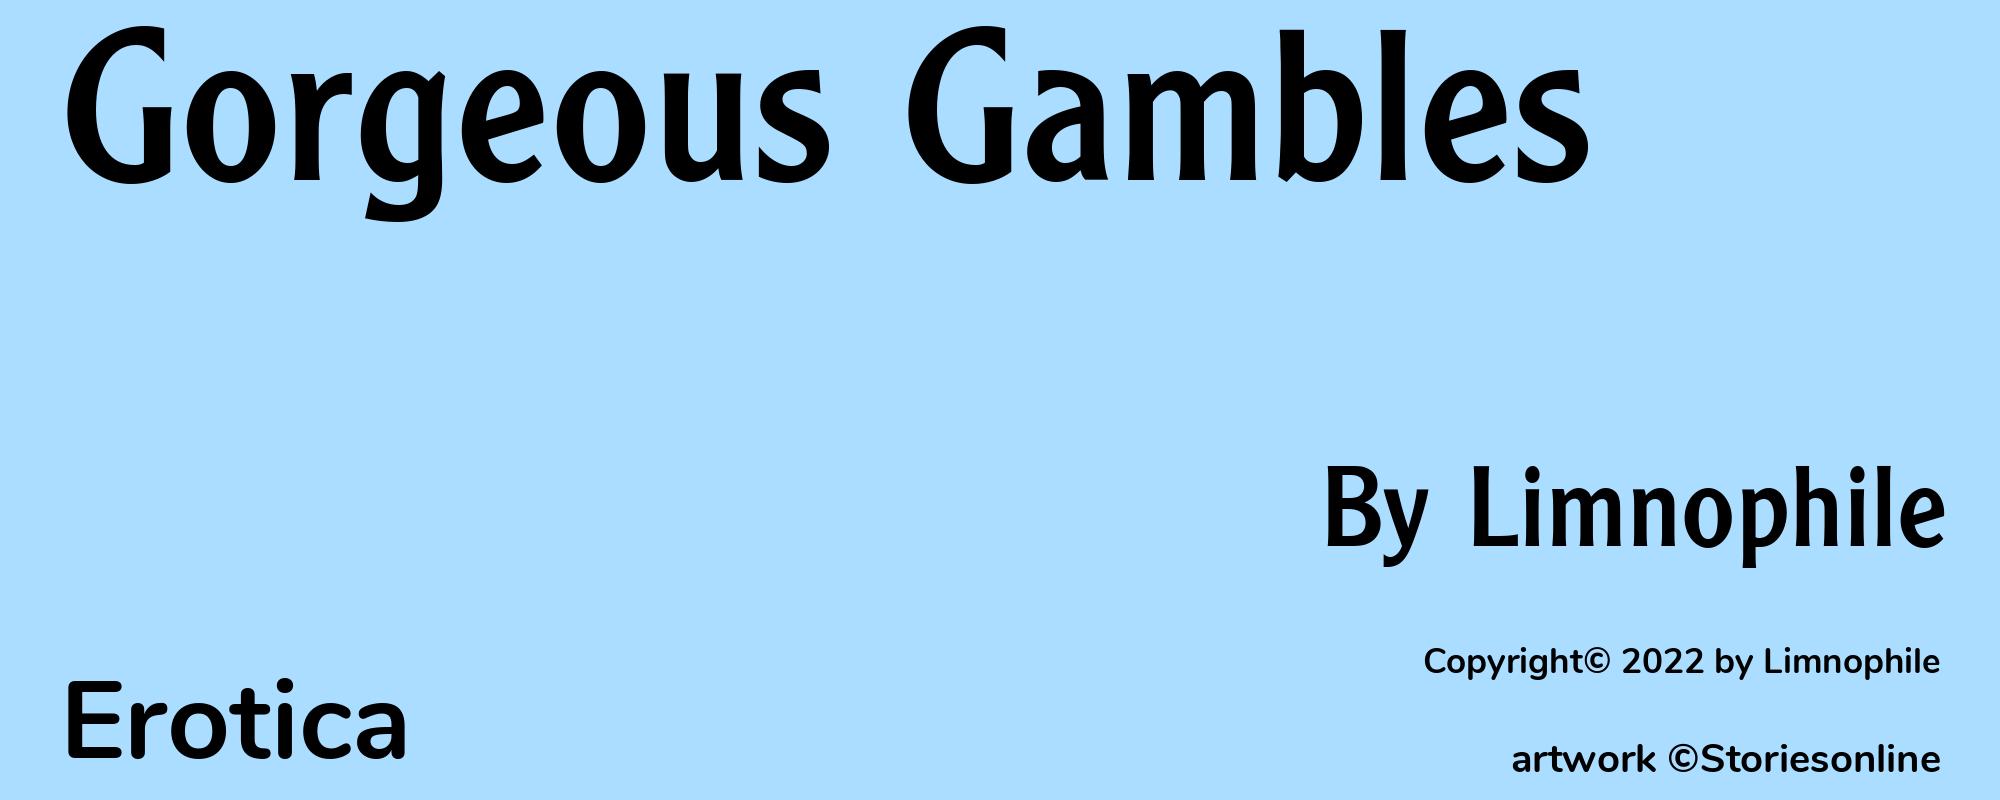 Gorgeous Gambles - Cover